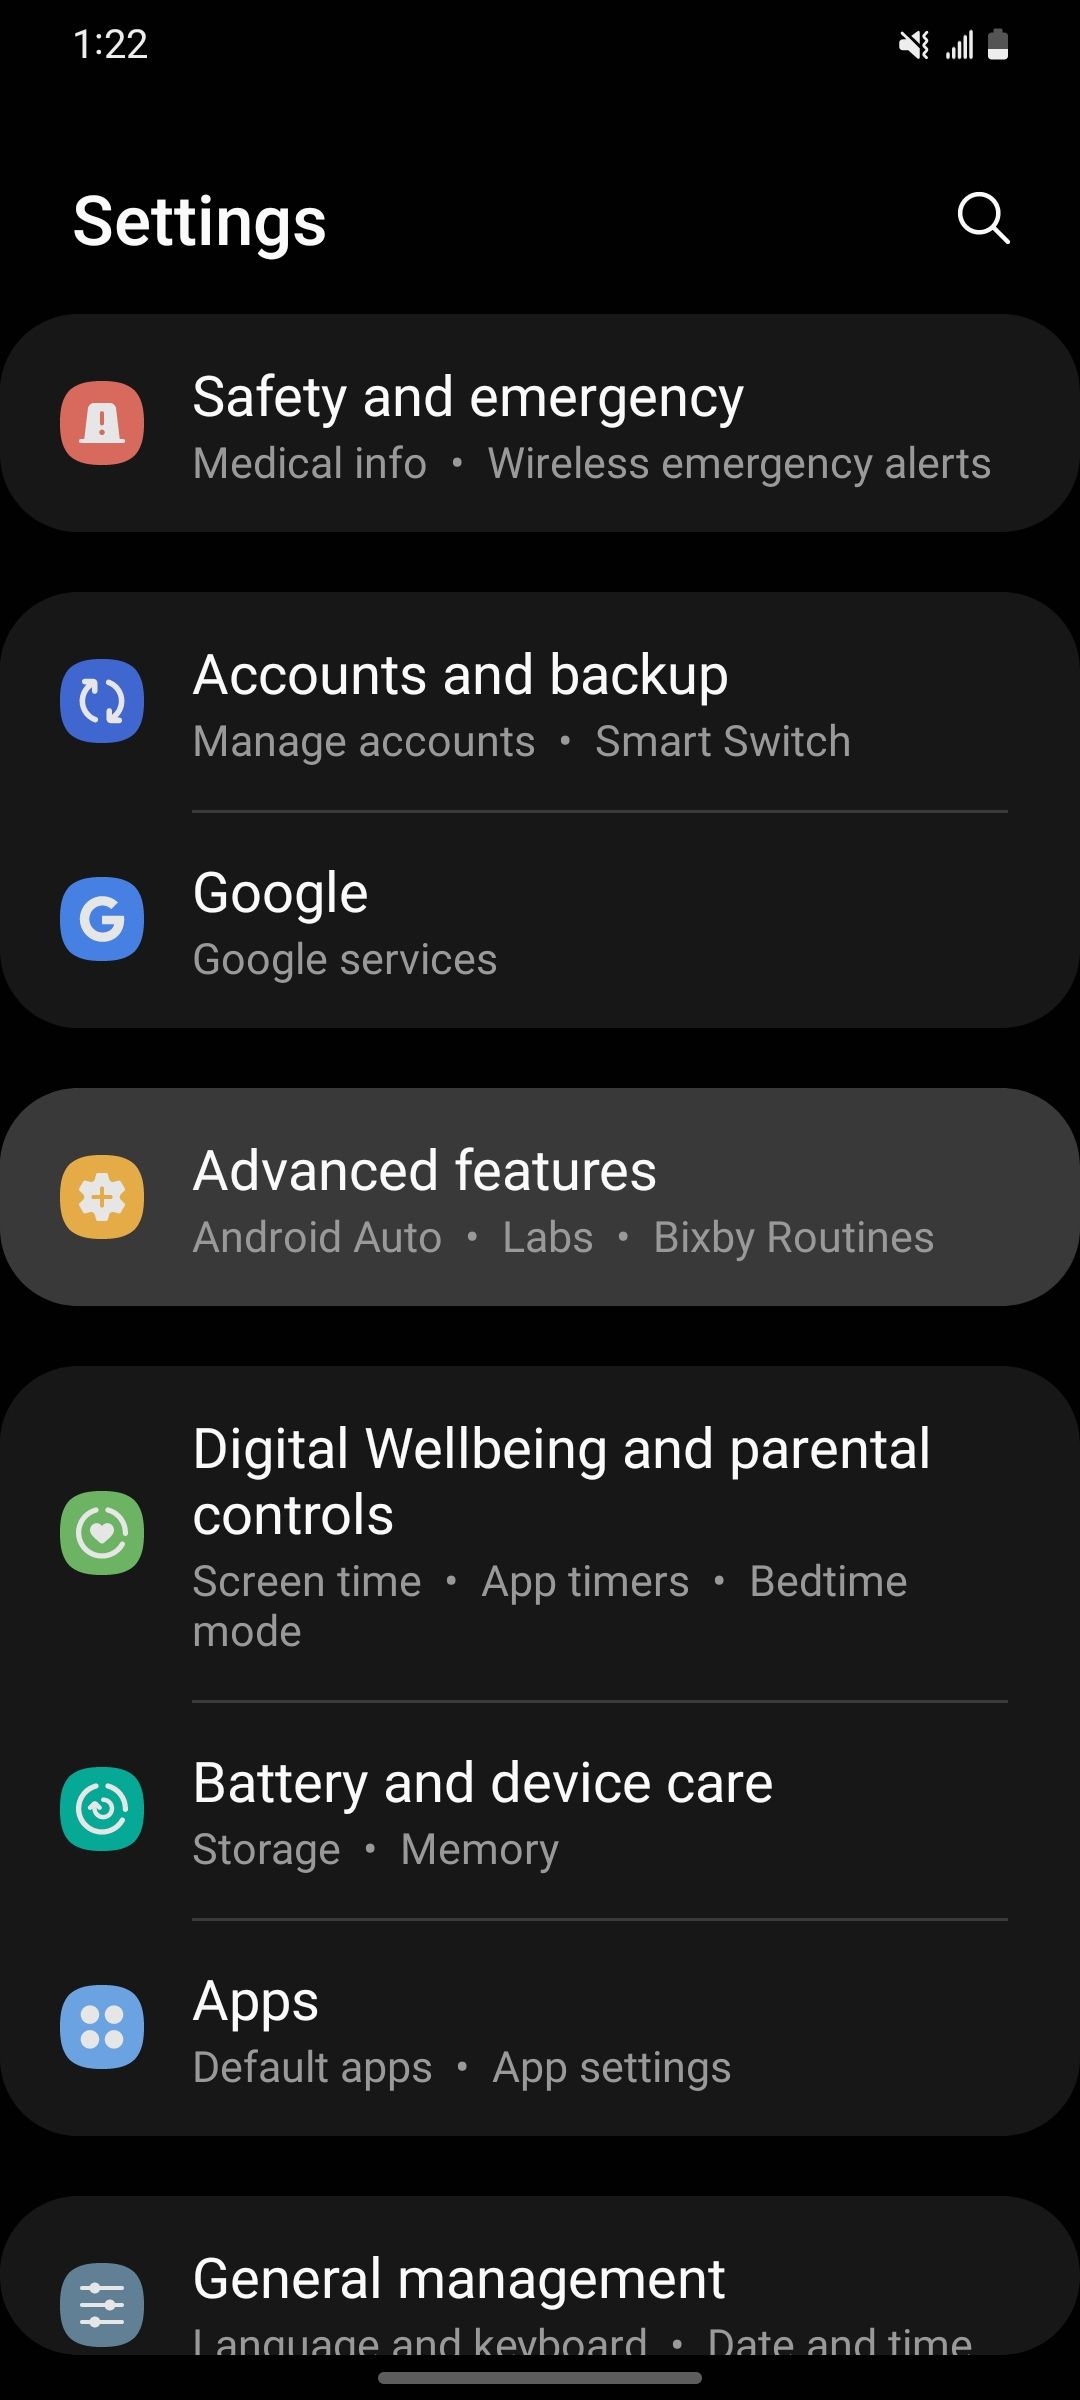 Highlighting the Advanced features section in the Settings app on a Samsung Galaxy phone